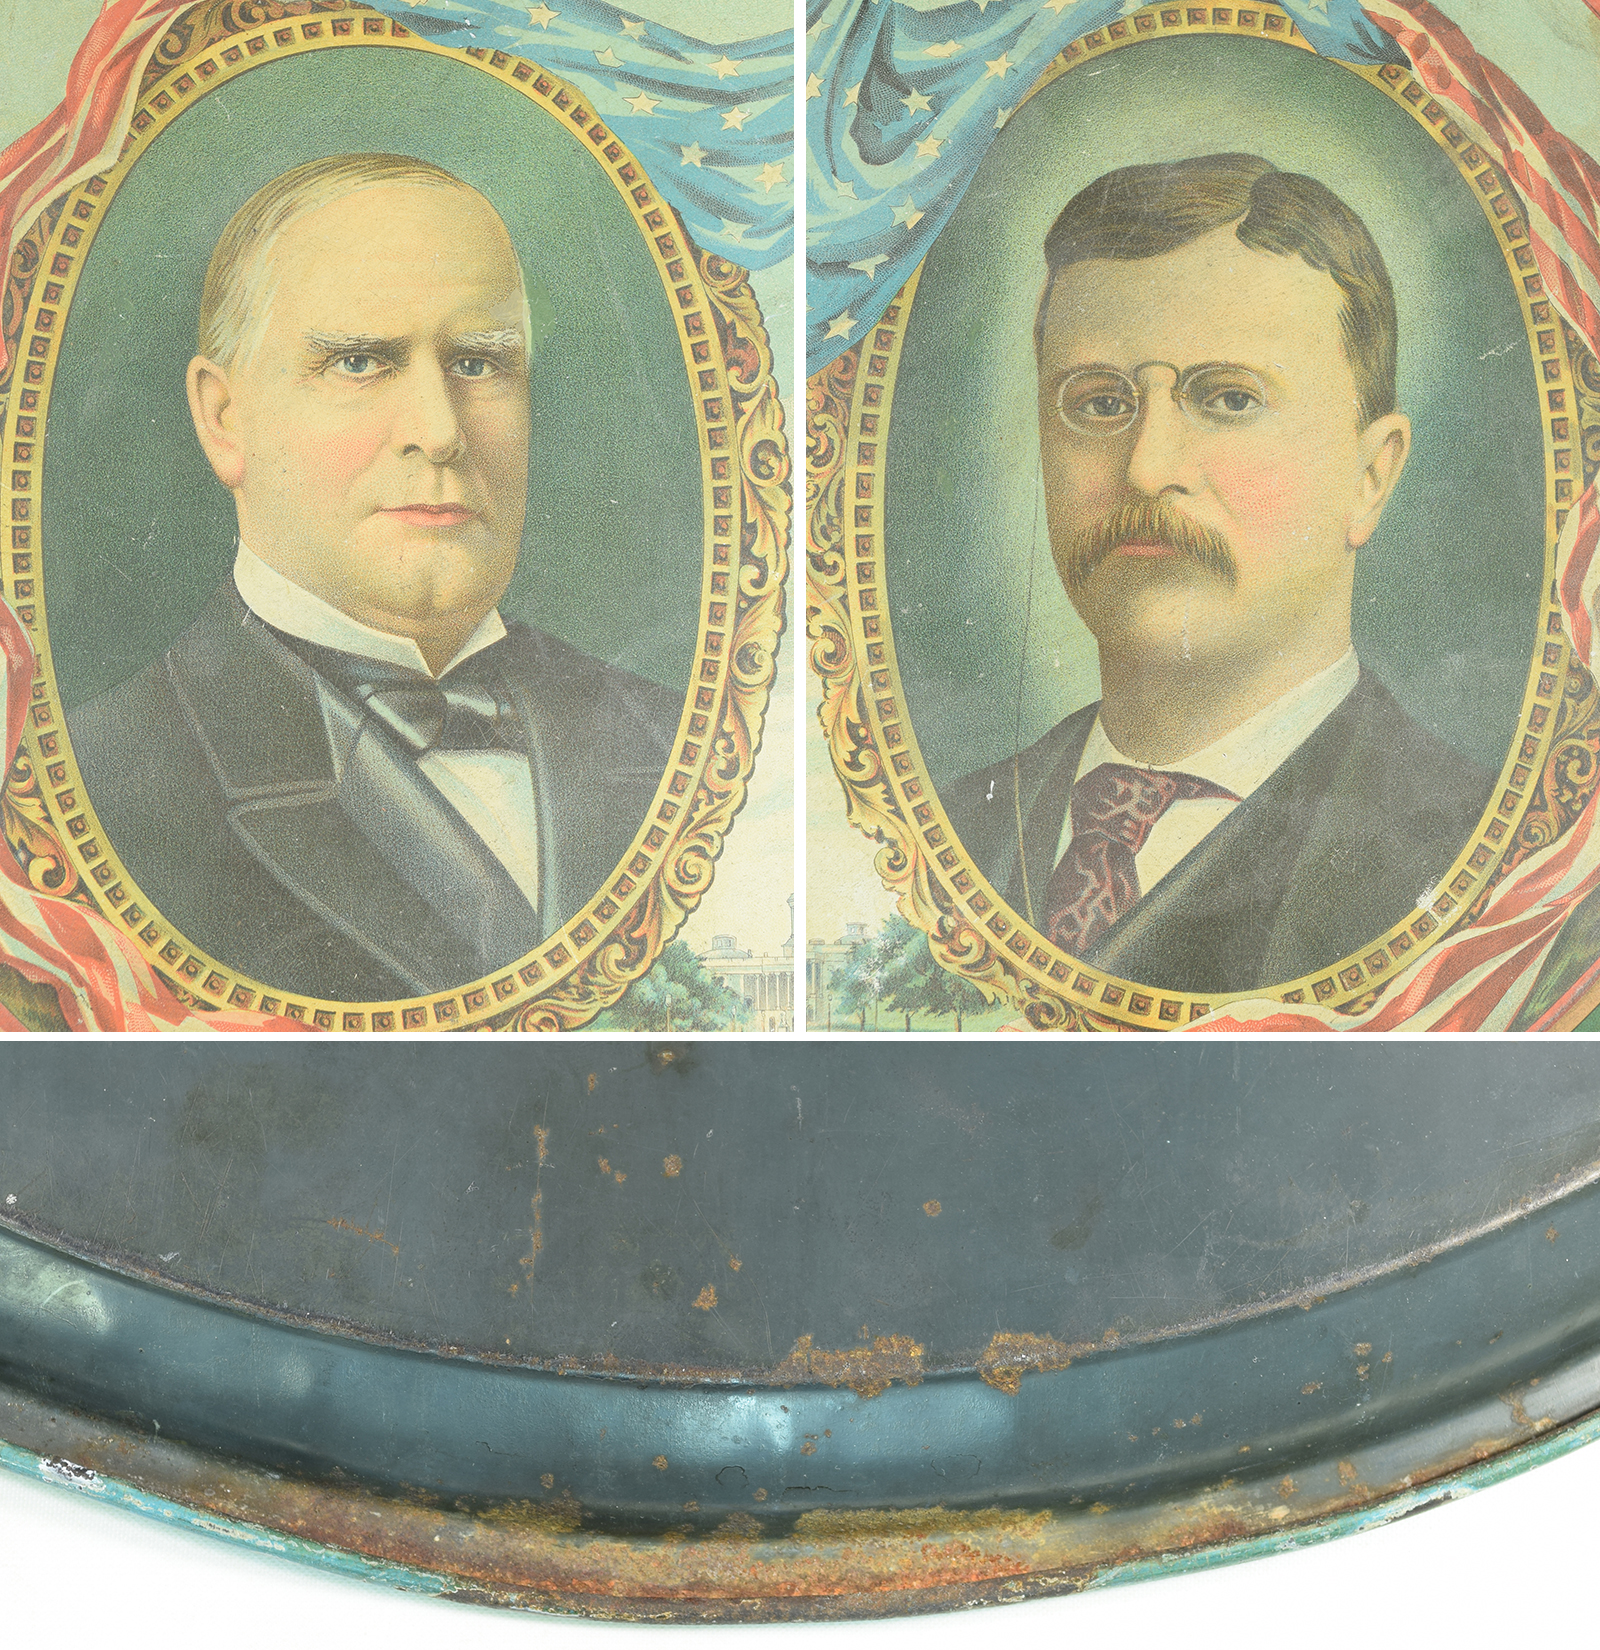 Other Collectibles 1900 SCARCE 16″ OVAL MCKINLEY-ROOSEVELT JUGATE CAMPAIGN TIN TRAY VG+/EXC